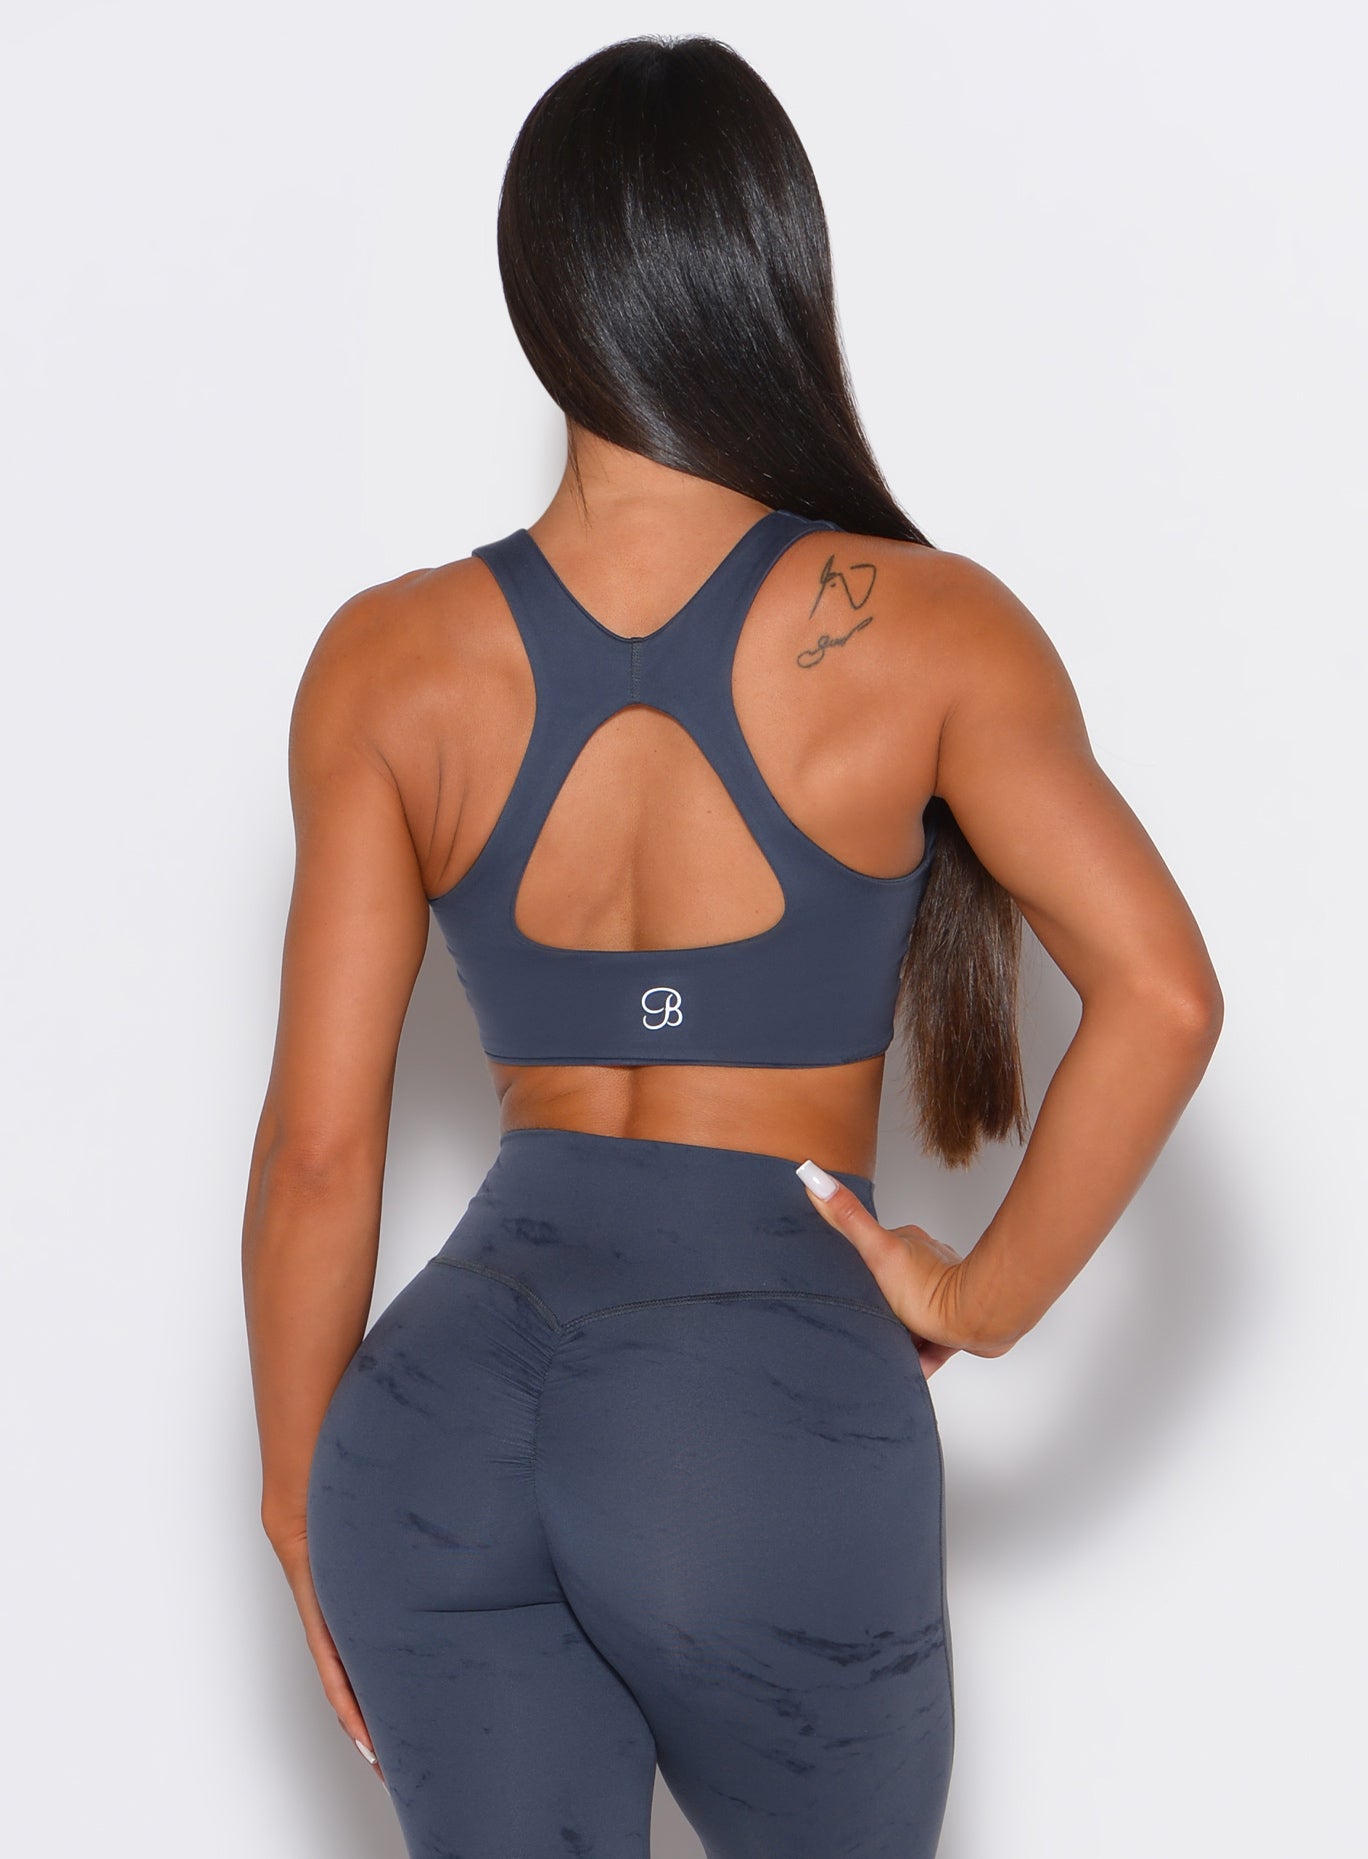 Back profile view of our model wearing the Square Neck Bra in Thunder Gray color along with a matching leggings 